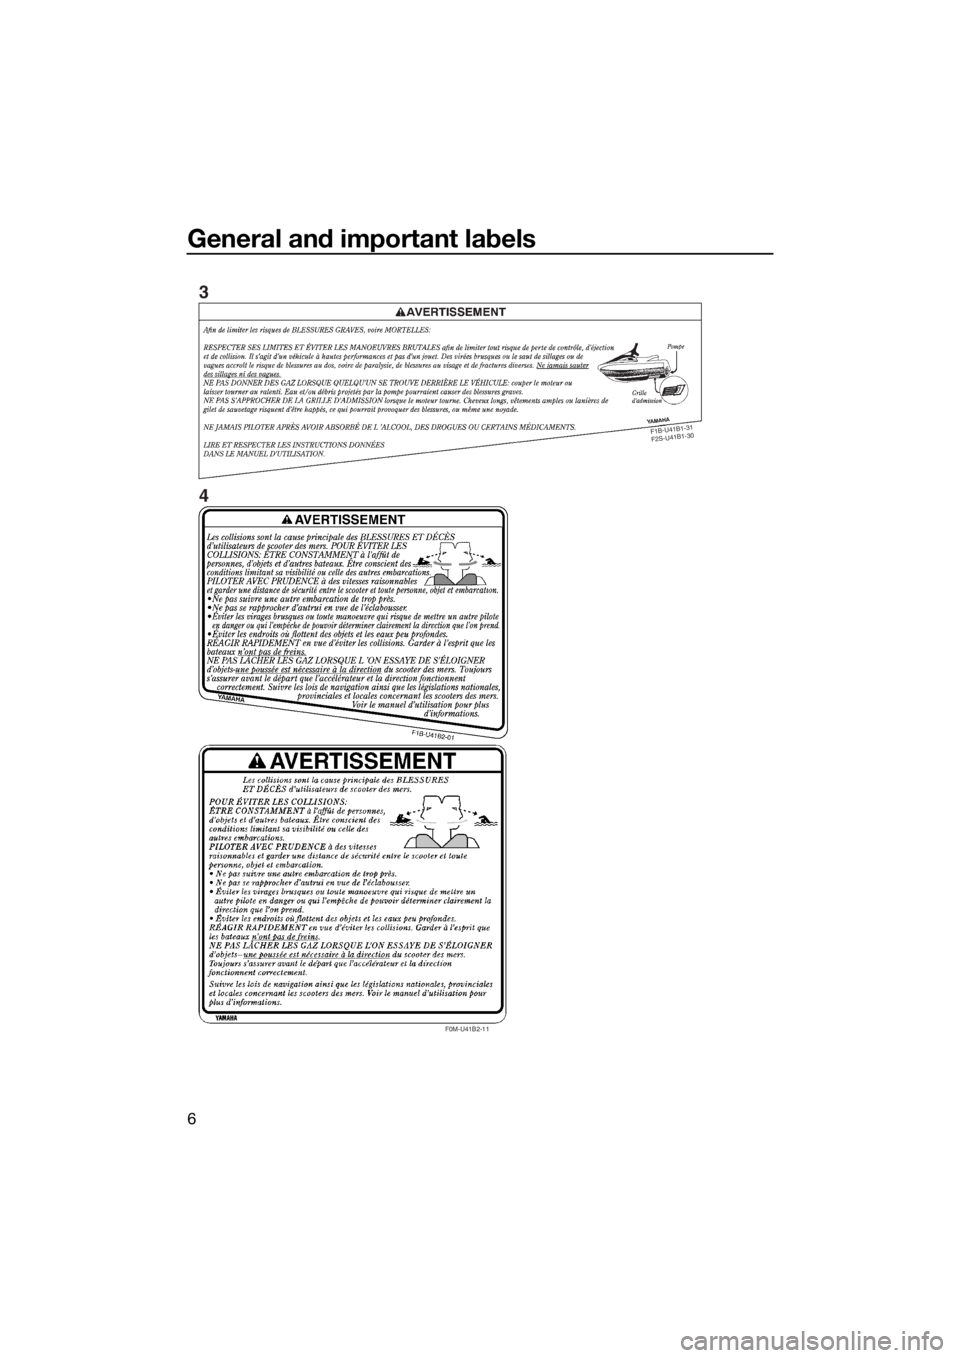 YAMAHA FX HO CRUISER 2018 User Guide General and important labels
6
F
1
B
-U
41
B
1-3
1
 
F
2
S
-U
4
1
B
1-3
0
F0M-U41B2-11
3
4
UF2T78E0.book  Page 6  Wednesday, July 12, 2017  9:40 AM 